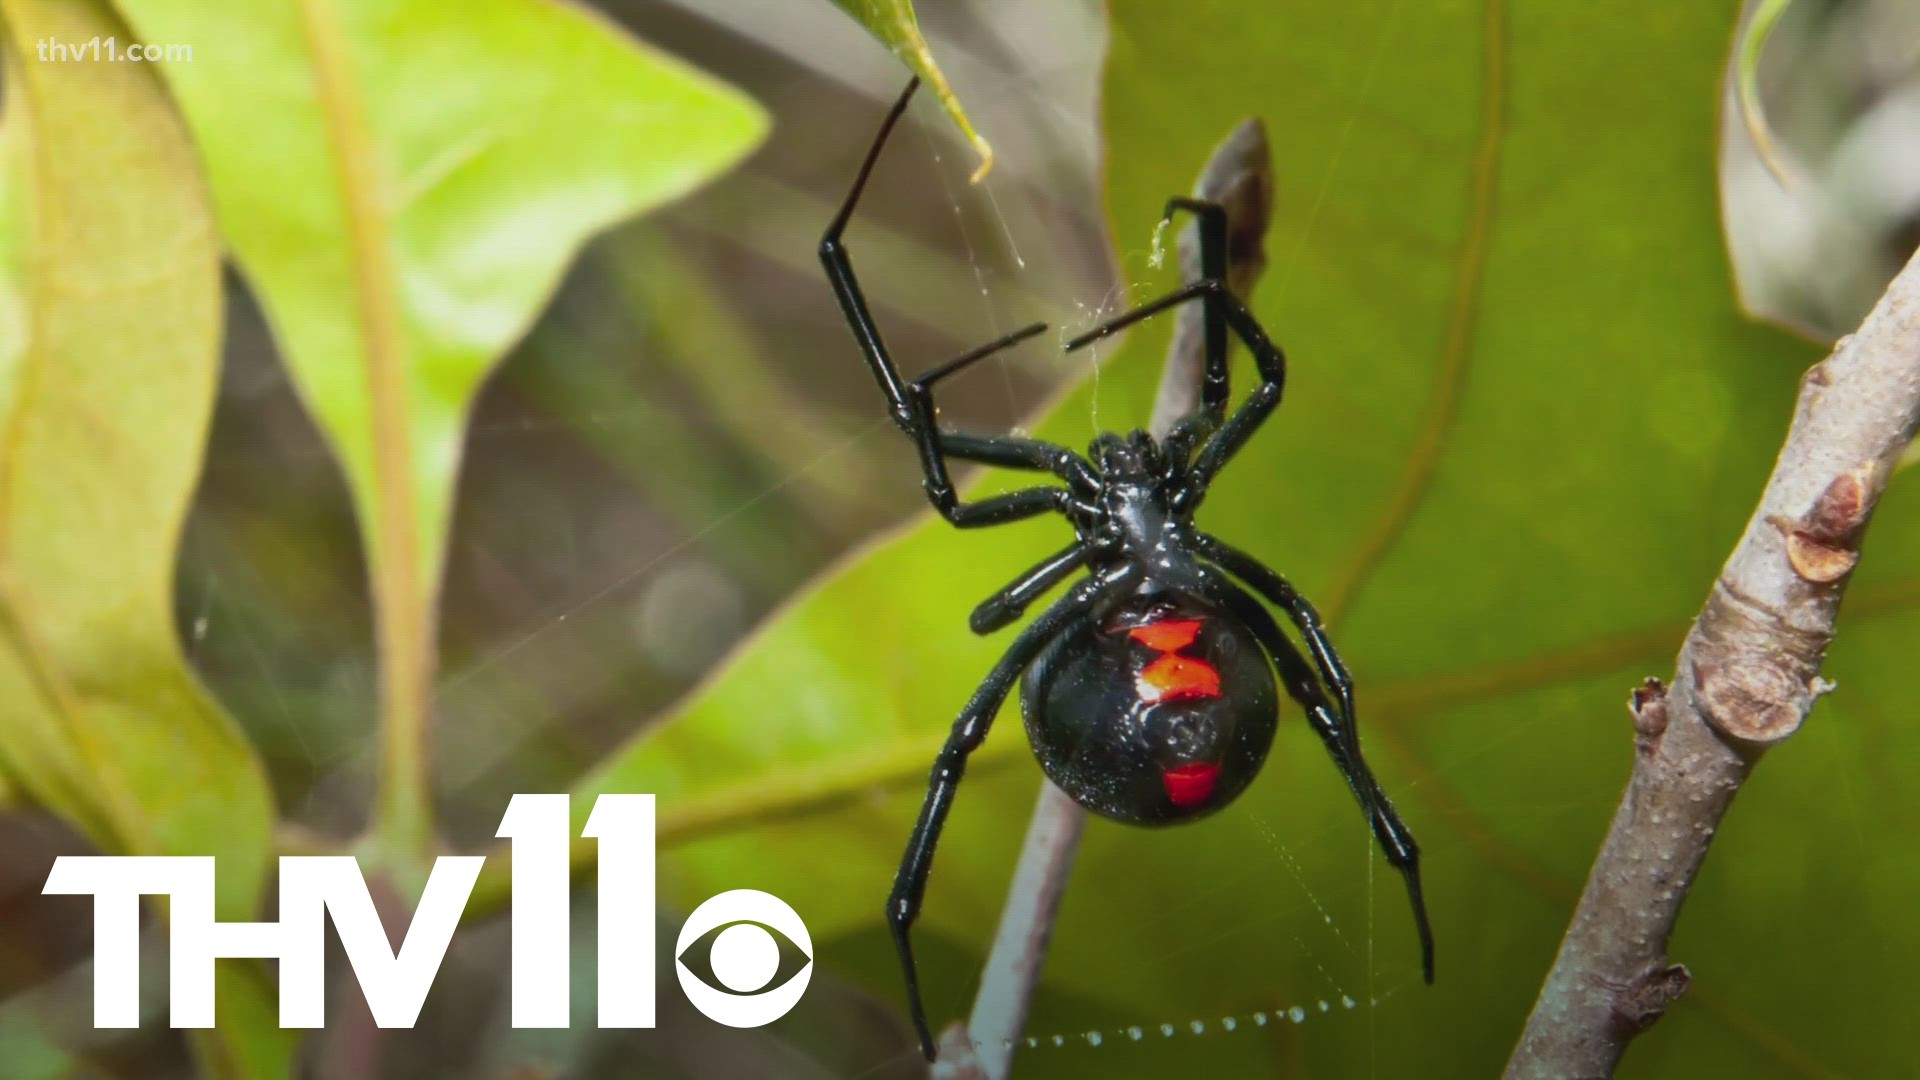 Black widows and brown recluses are no strangers to Arkansas, and experts are saying to watch for them this summer as the weather heats up.